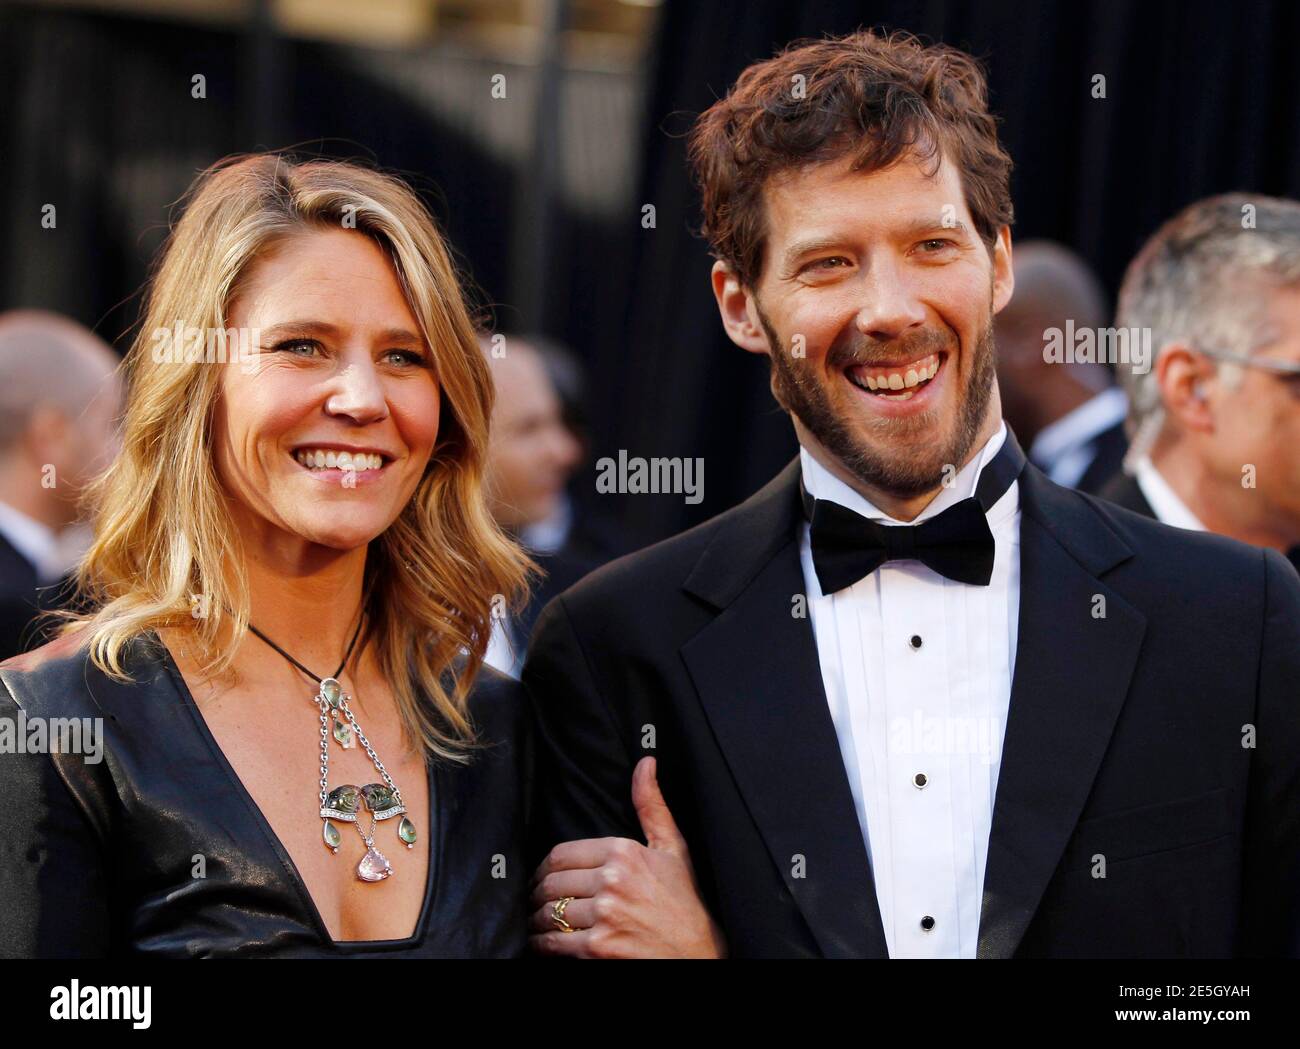 Aron Ralston, subject of the film '127 Hours,' and wife Jessica Trusty arrive at the 83rd Academy Awards in Hollywood, California, February 27, 2011. REUTERS/Lucas Jackson (UNITED STATES - Tags: ENTERTAINMENT PROFILE SOCIETY) (OSCARS-ARRIVALS) Stock Photo